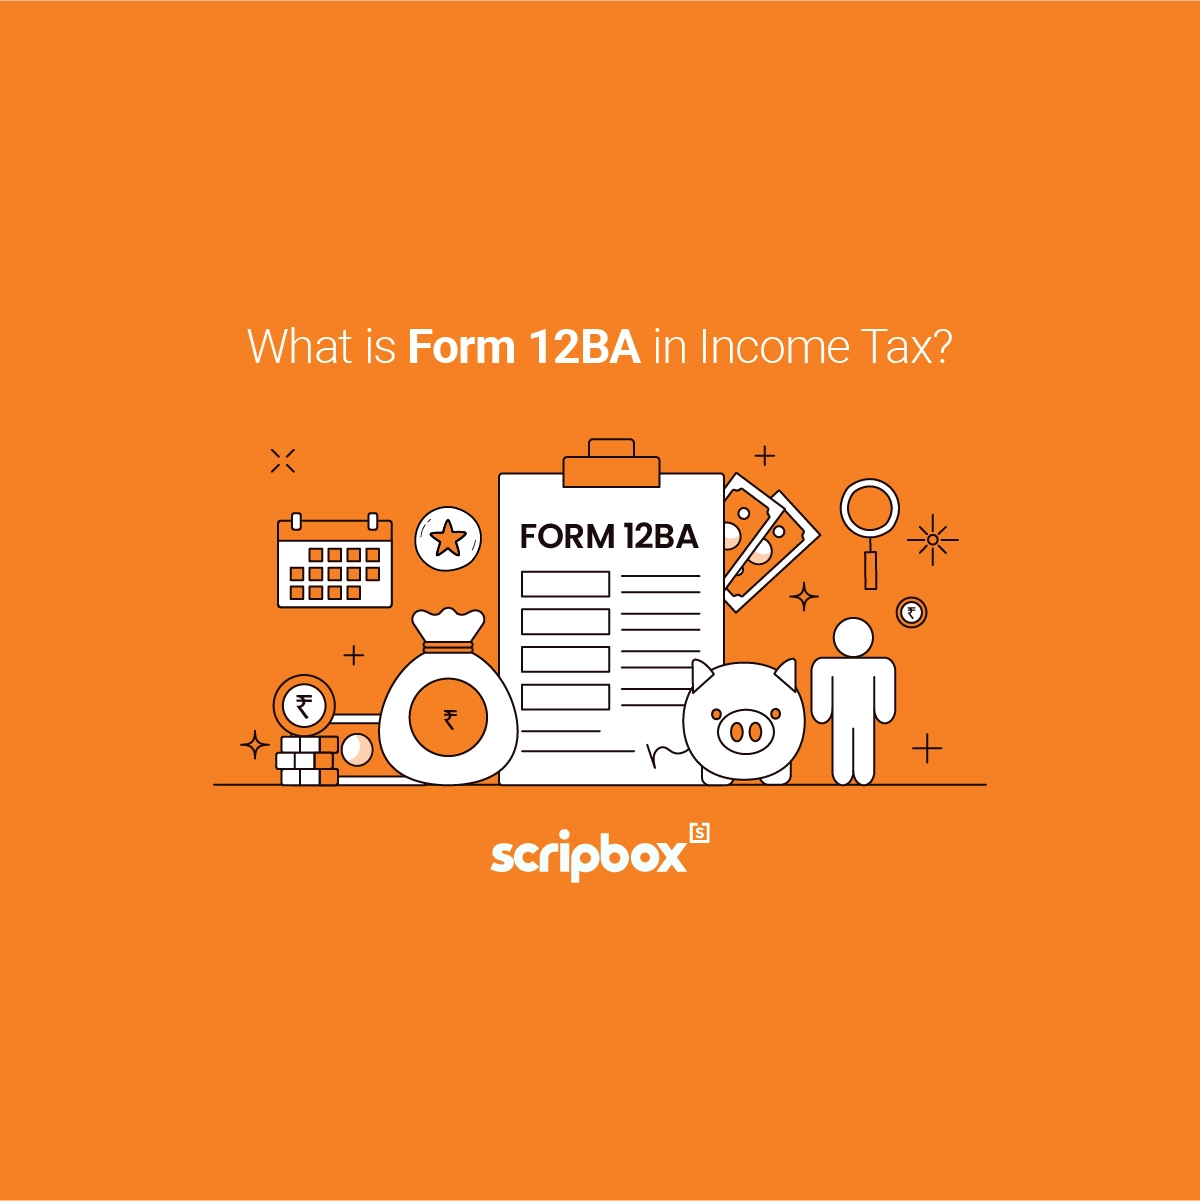 What is form 12ba